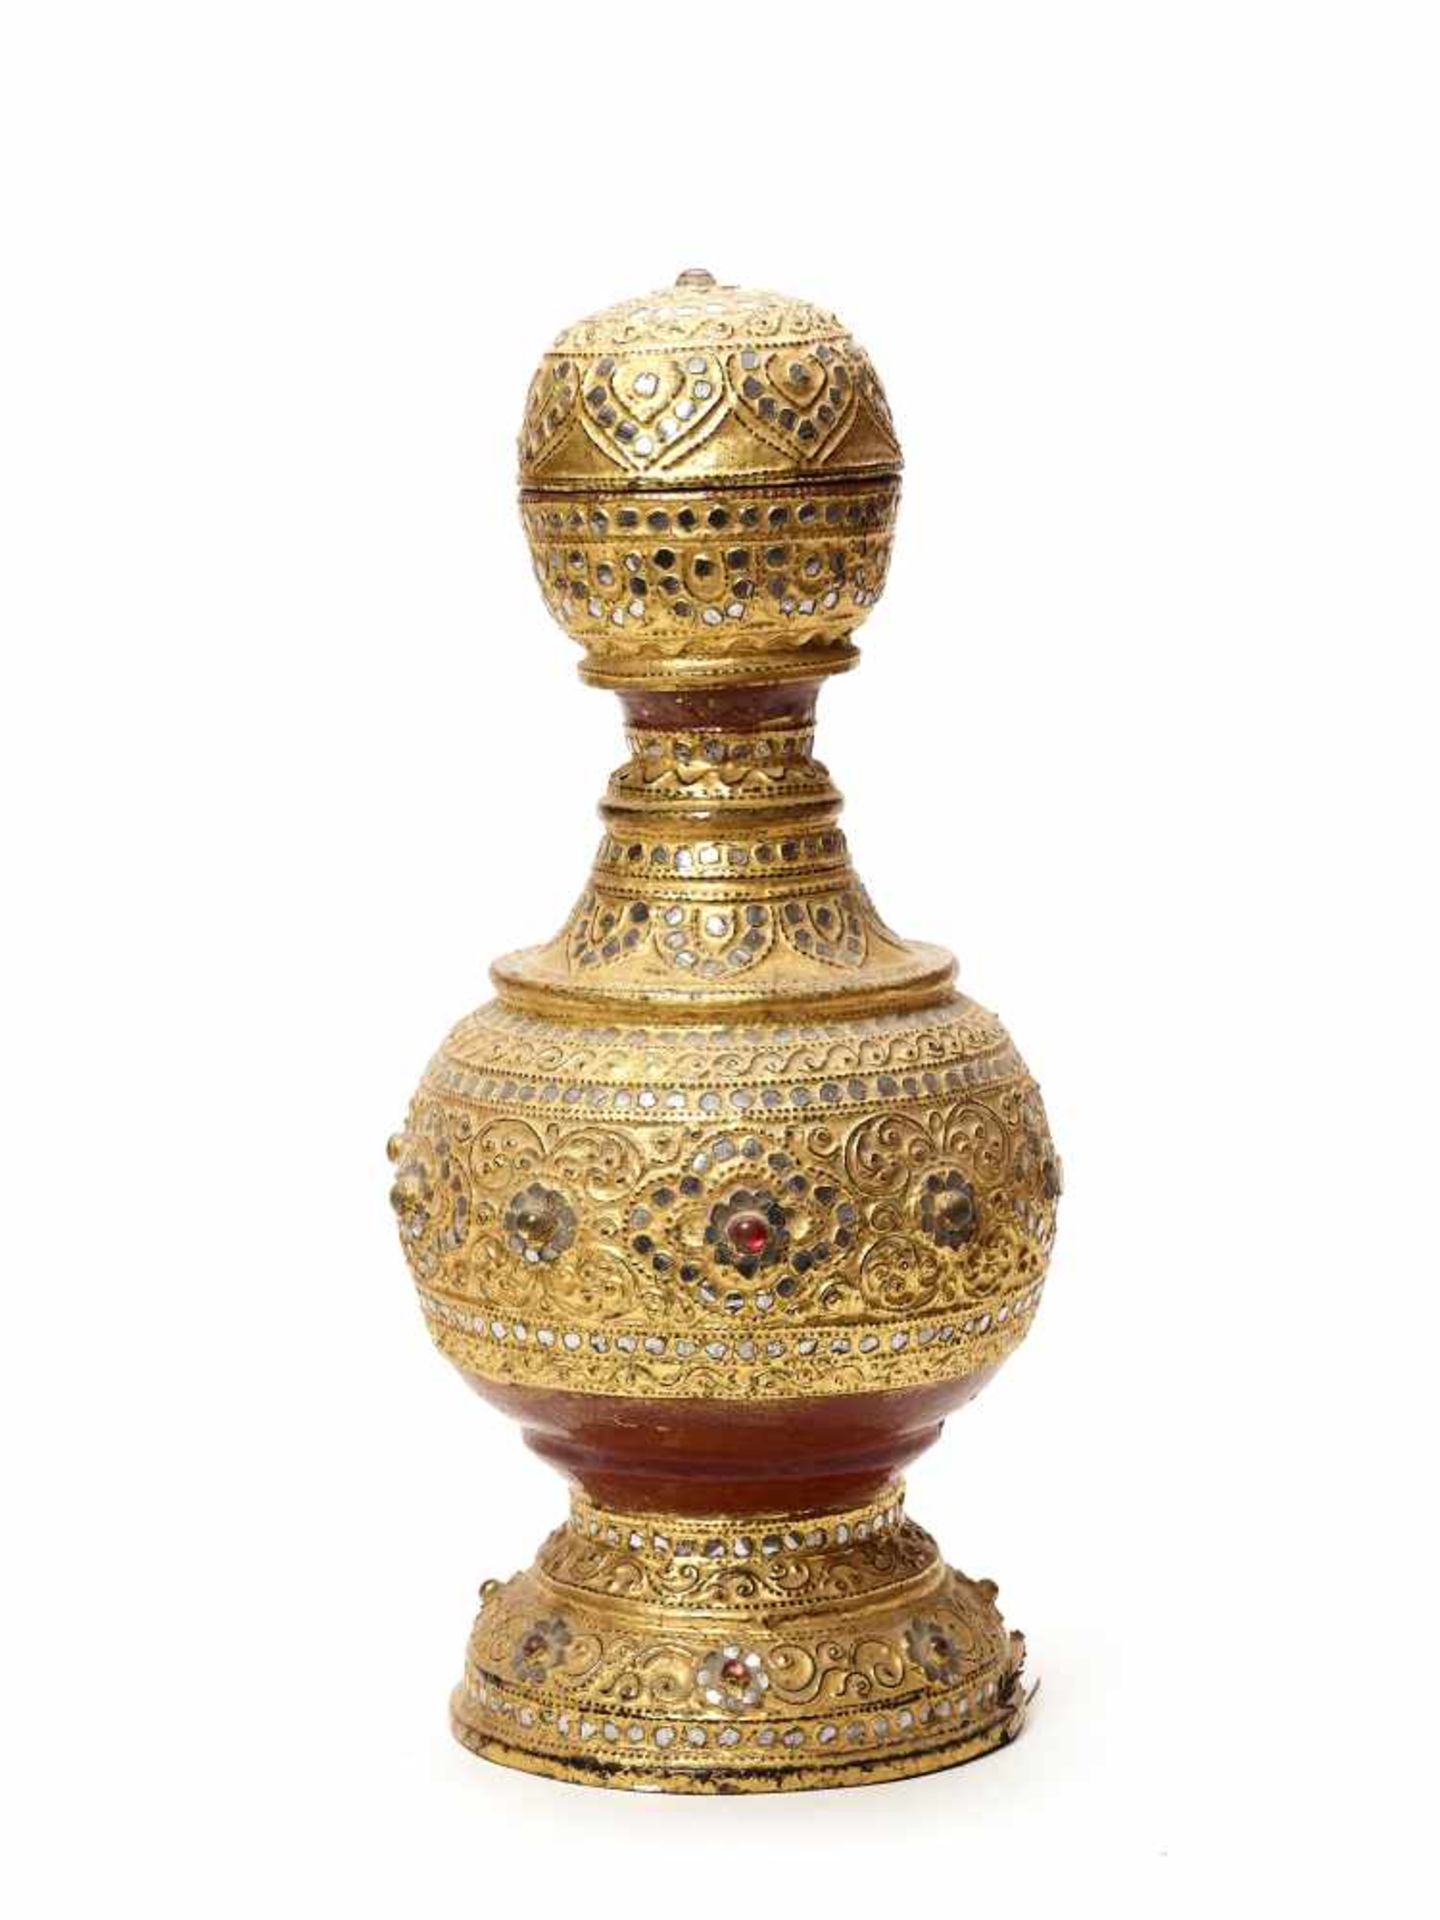 A BURMESE MANDALAY-STYLE LACQUER GILT WOOD LIDDED VESSEL IN THE SHAPE OF A PAGODAWood, gold and - Image 3 of 5